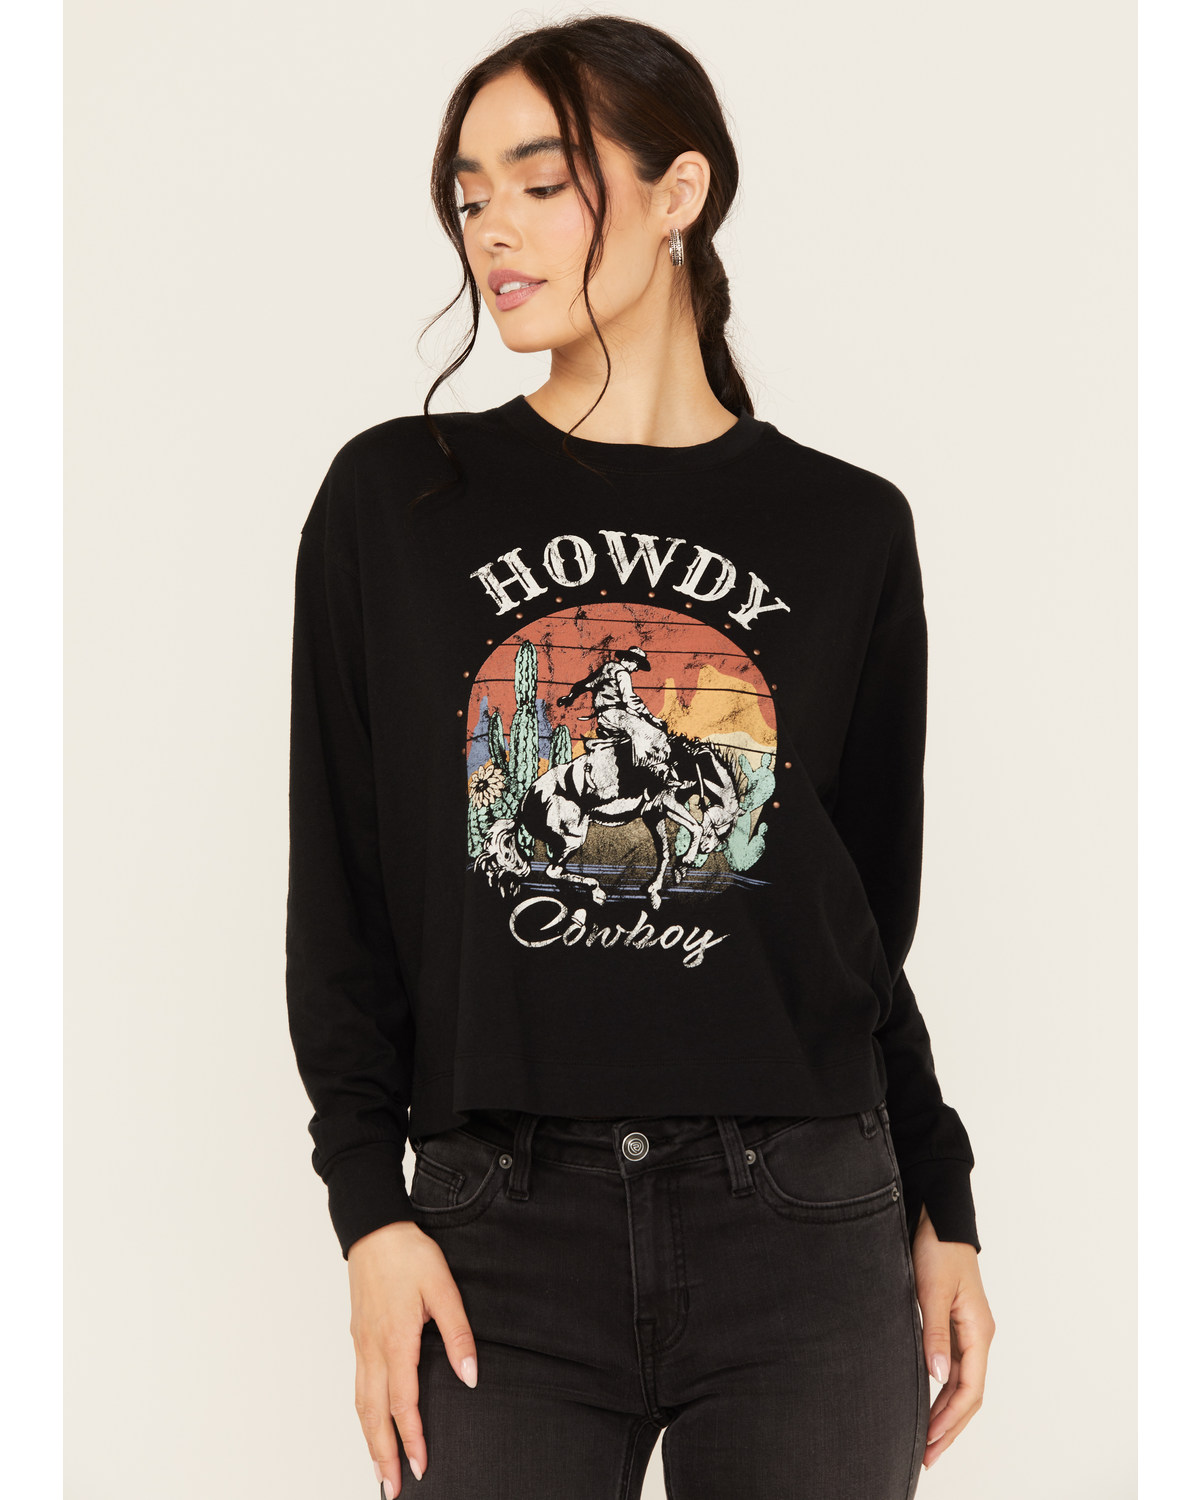 White Crow Women's Studded Howdy Long Sleeve Graphic Tee